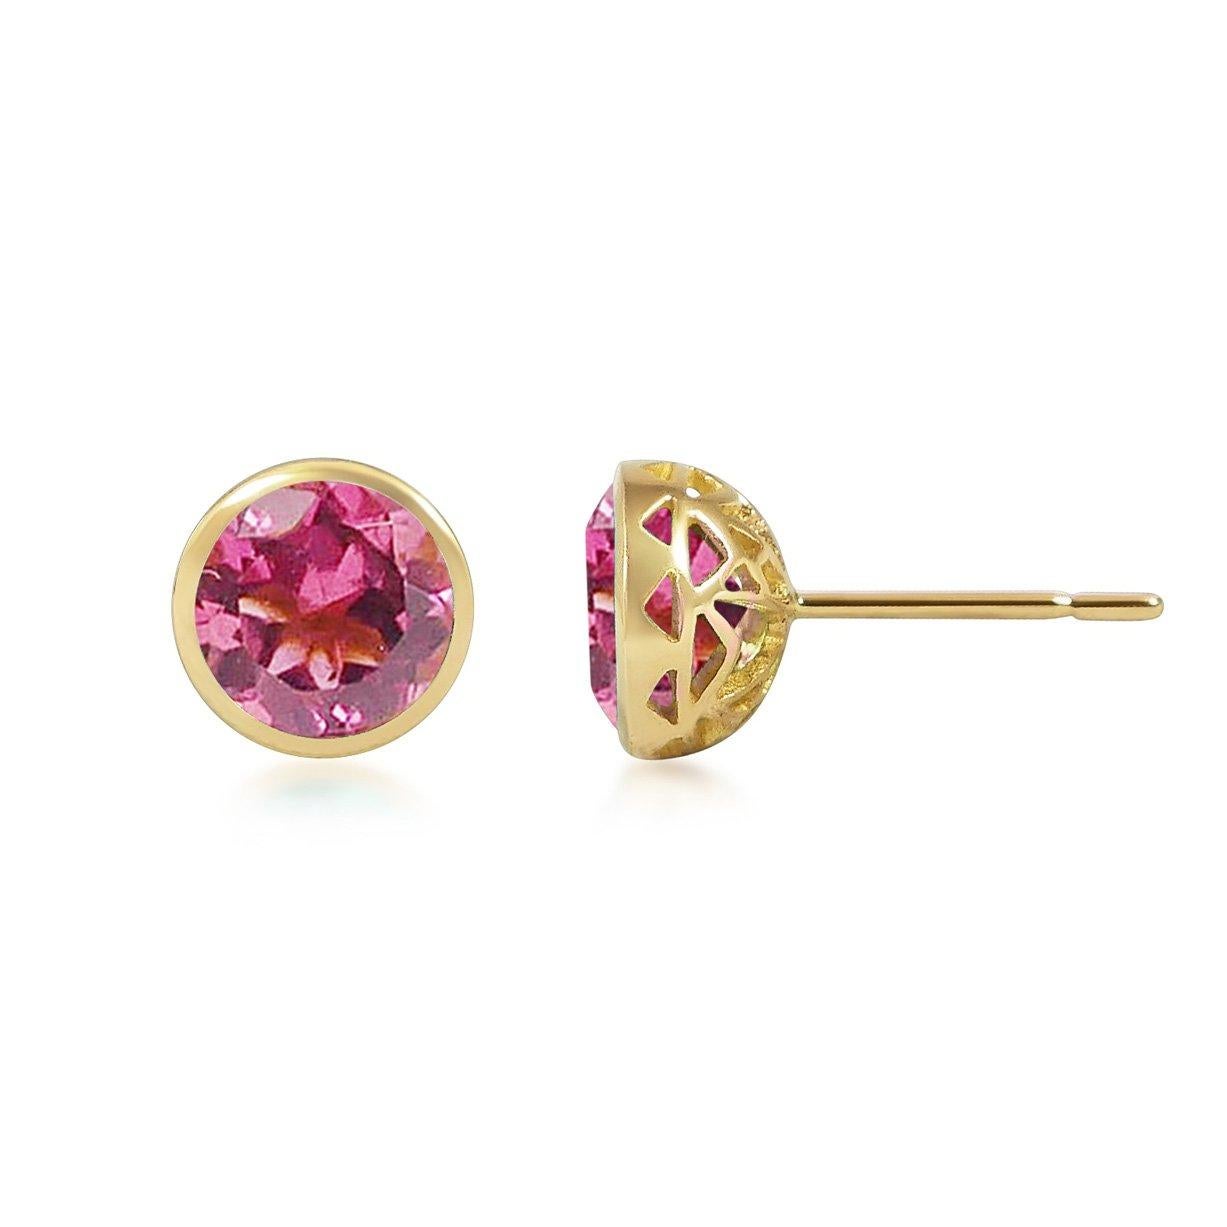 Round Cut Handcrafted 2.60 Carats Pink Tourmaline 18 Karat Yellow Gold Stud Earrings For Sale